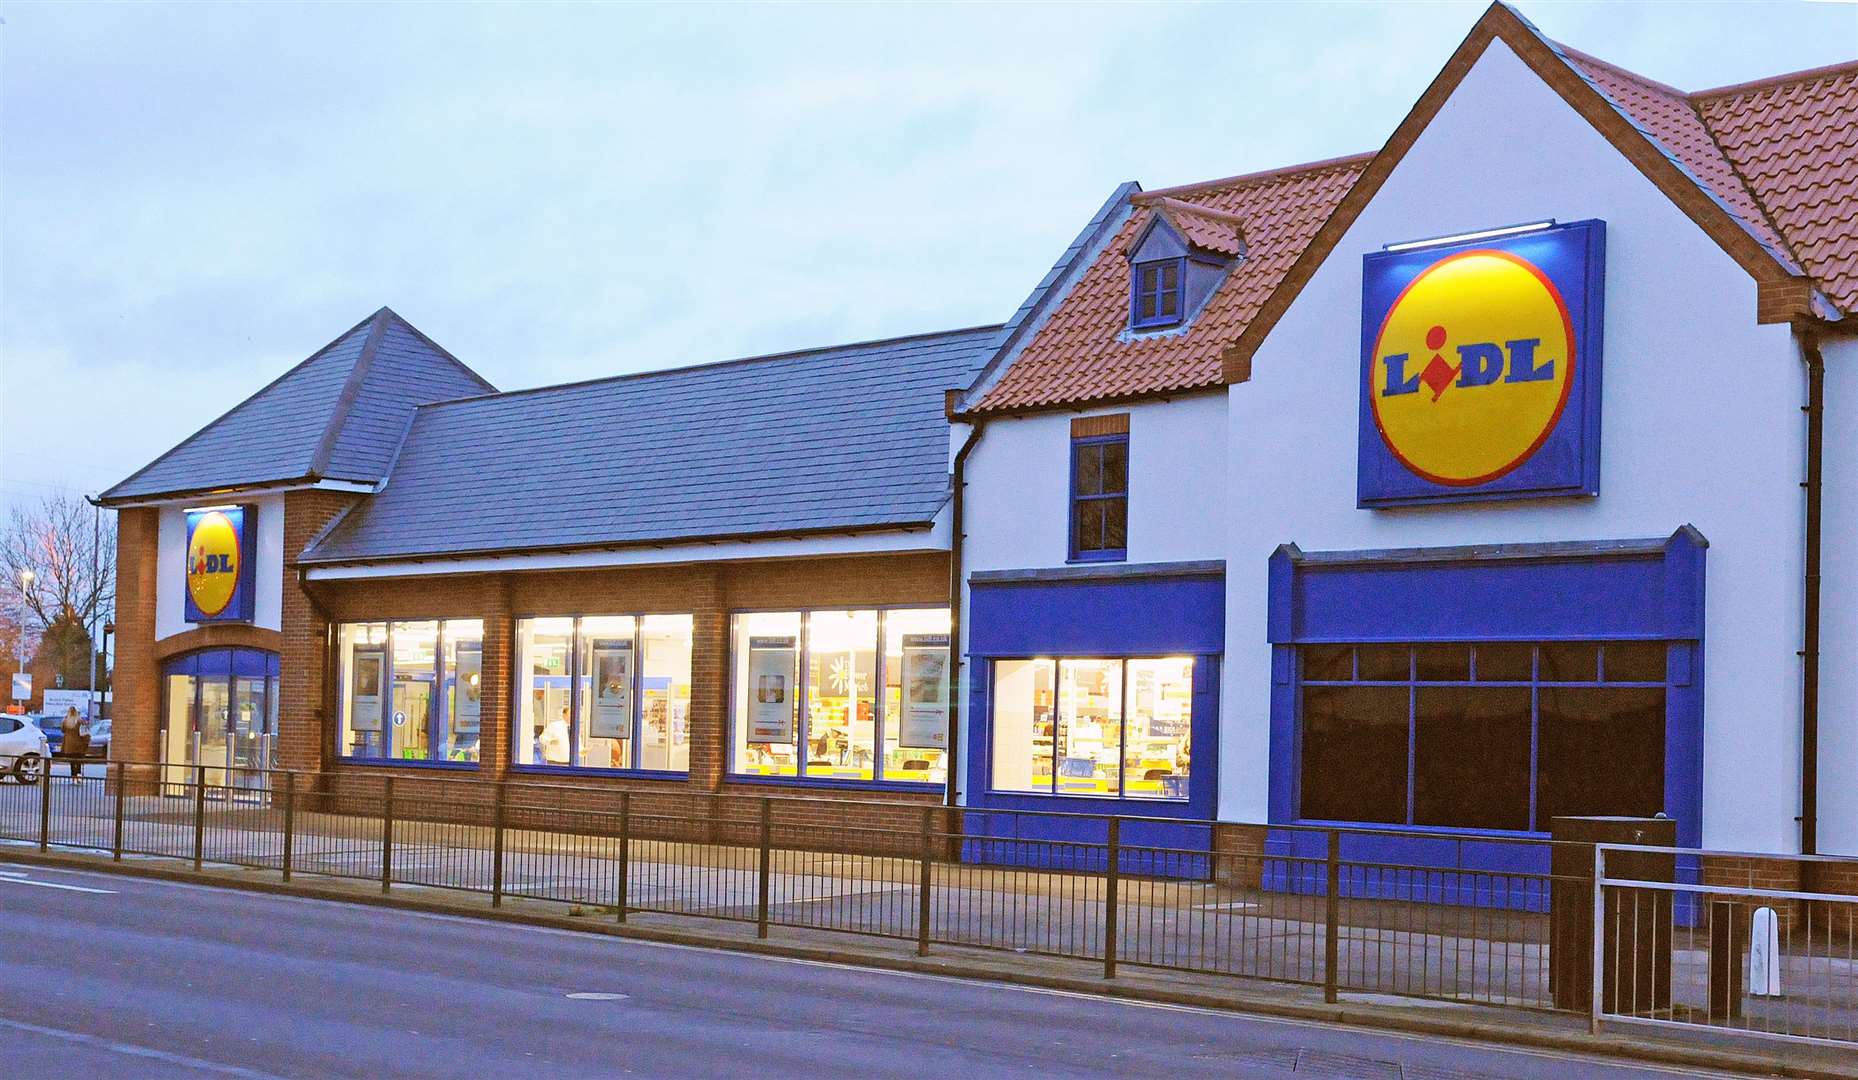 James Riley stole from Lynn's Lidl supermarket